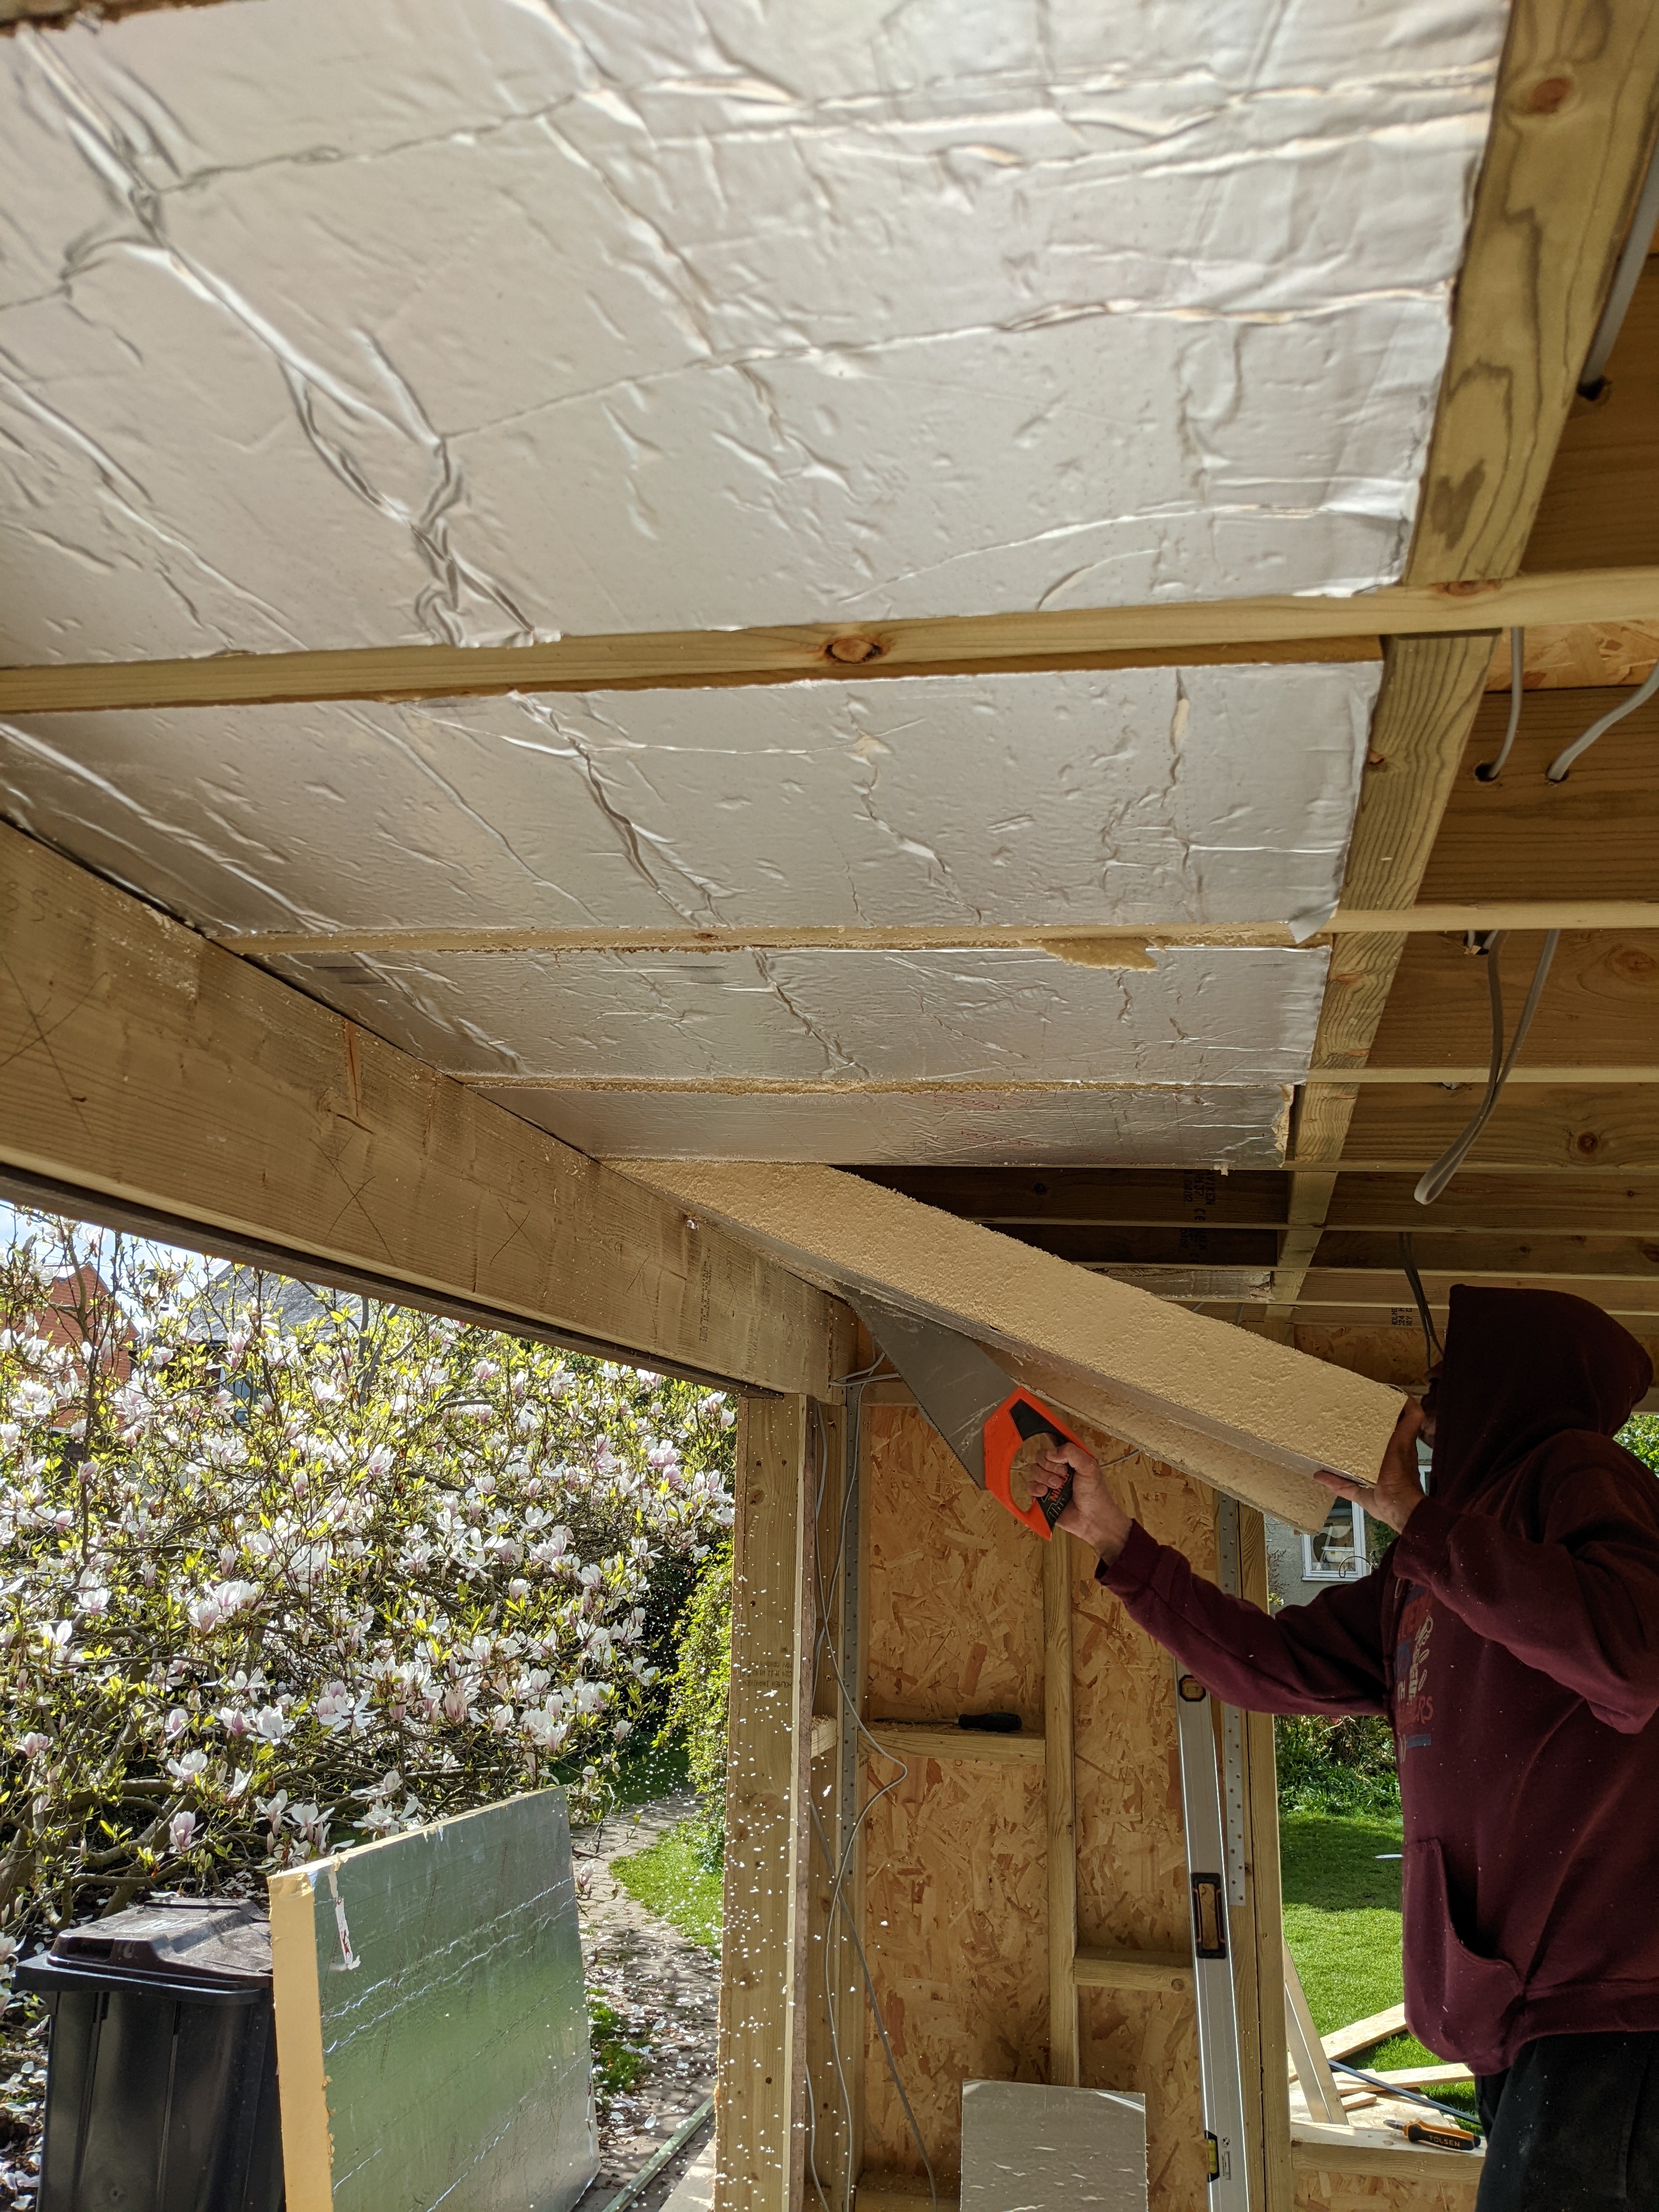 fitted insulation between the joists